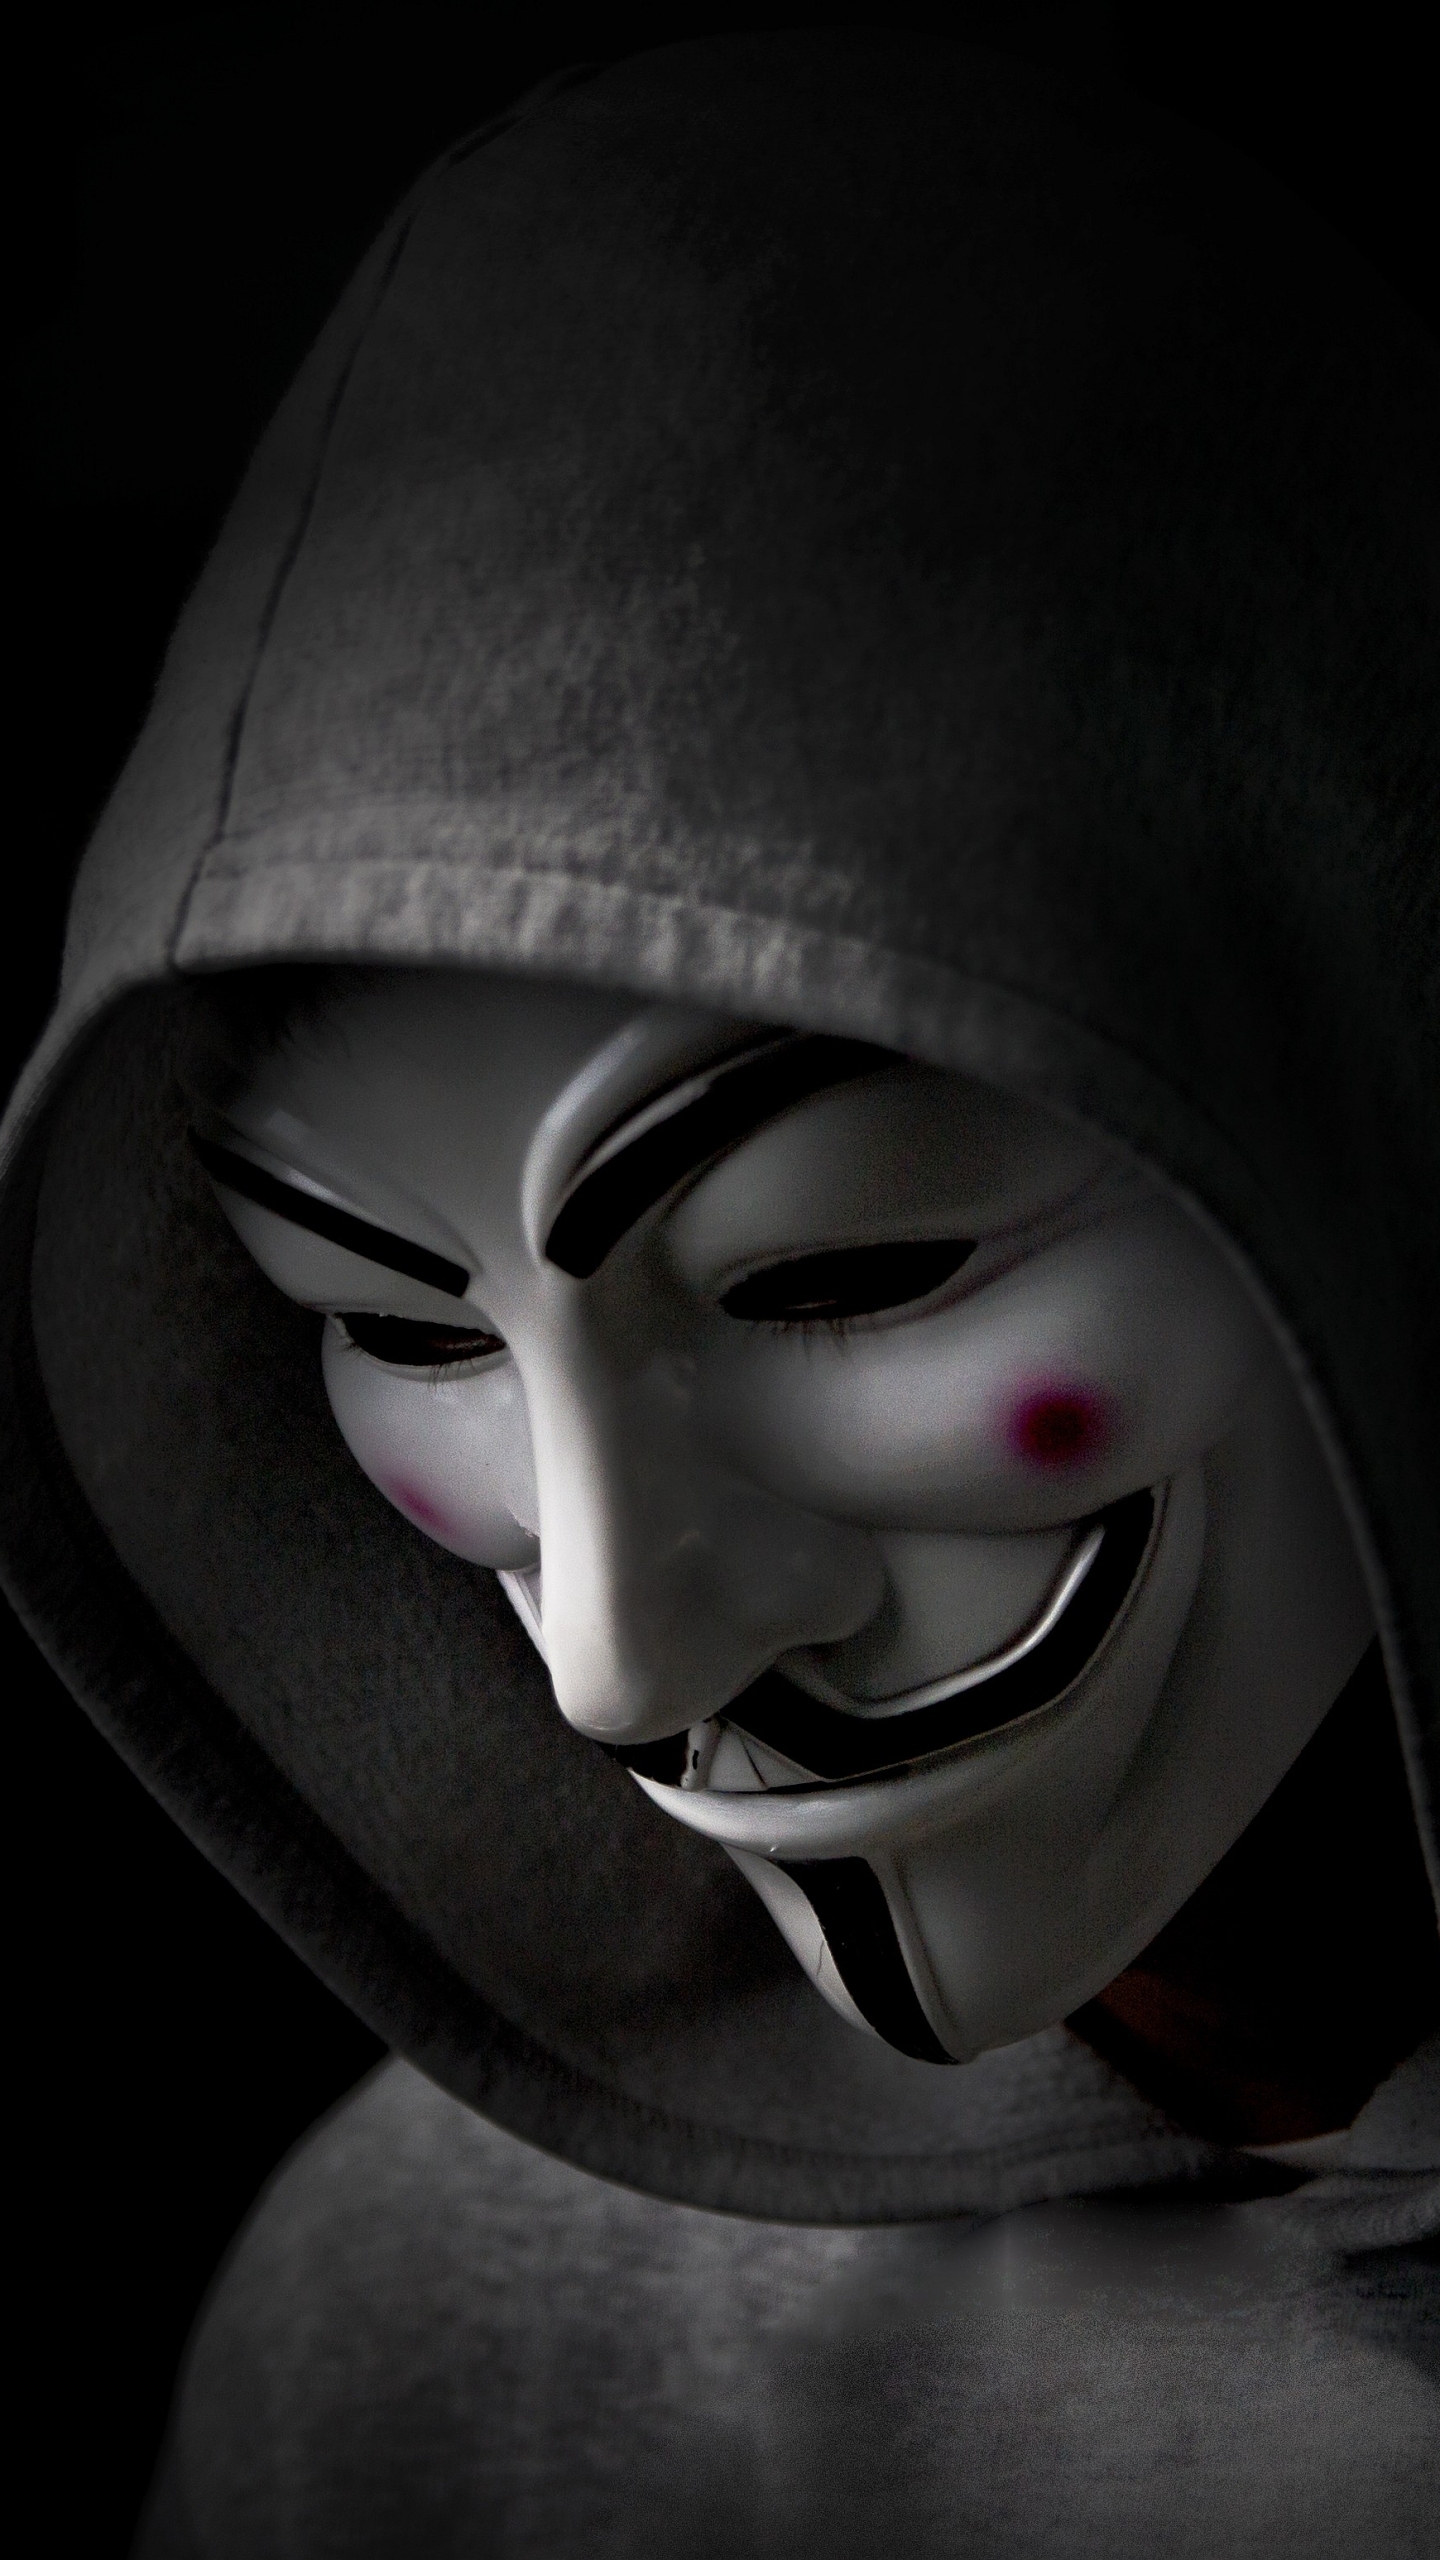 Hooded anonymous in a Guy Fawkes mask